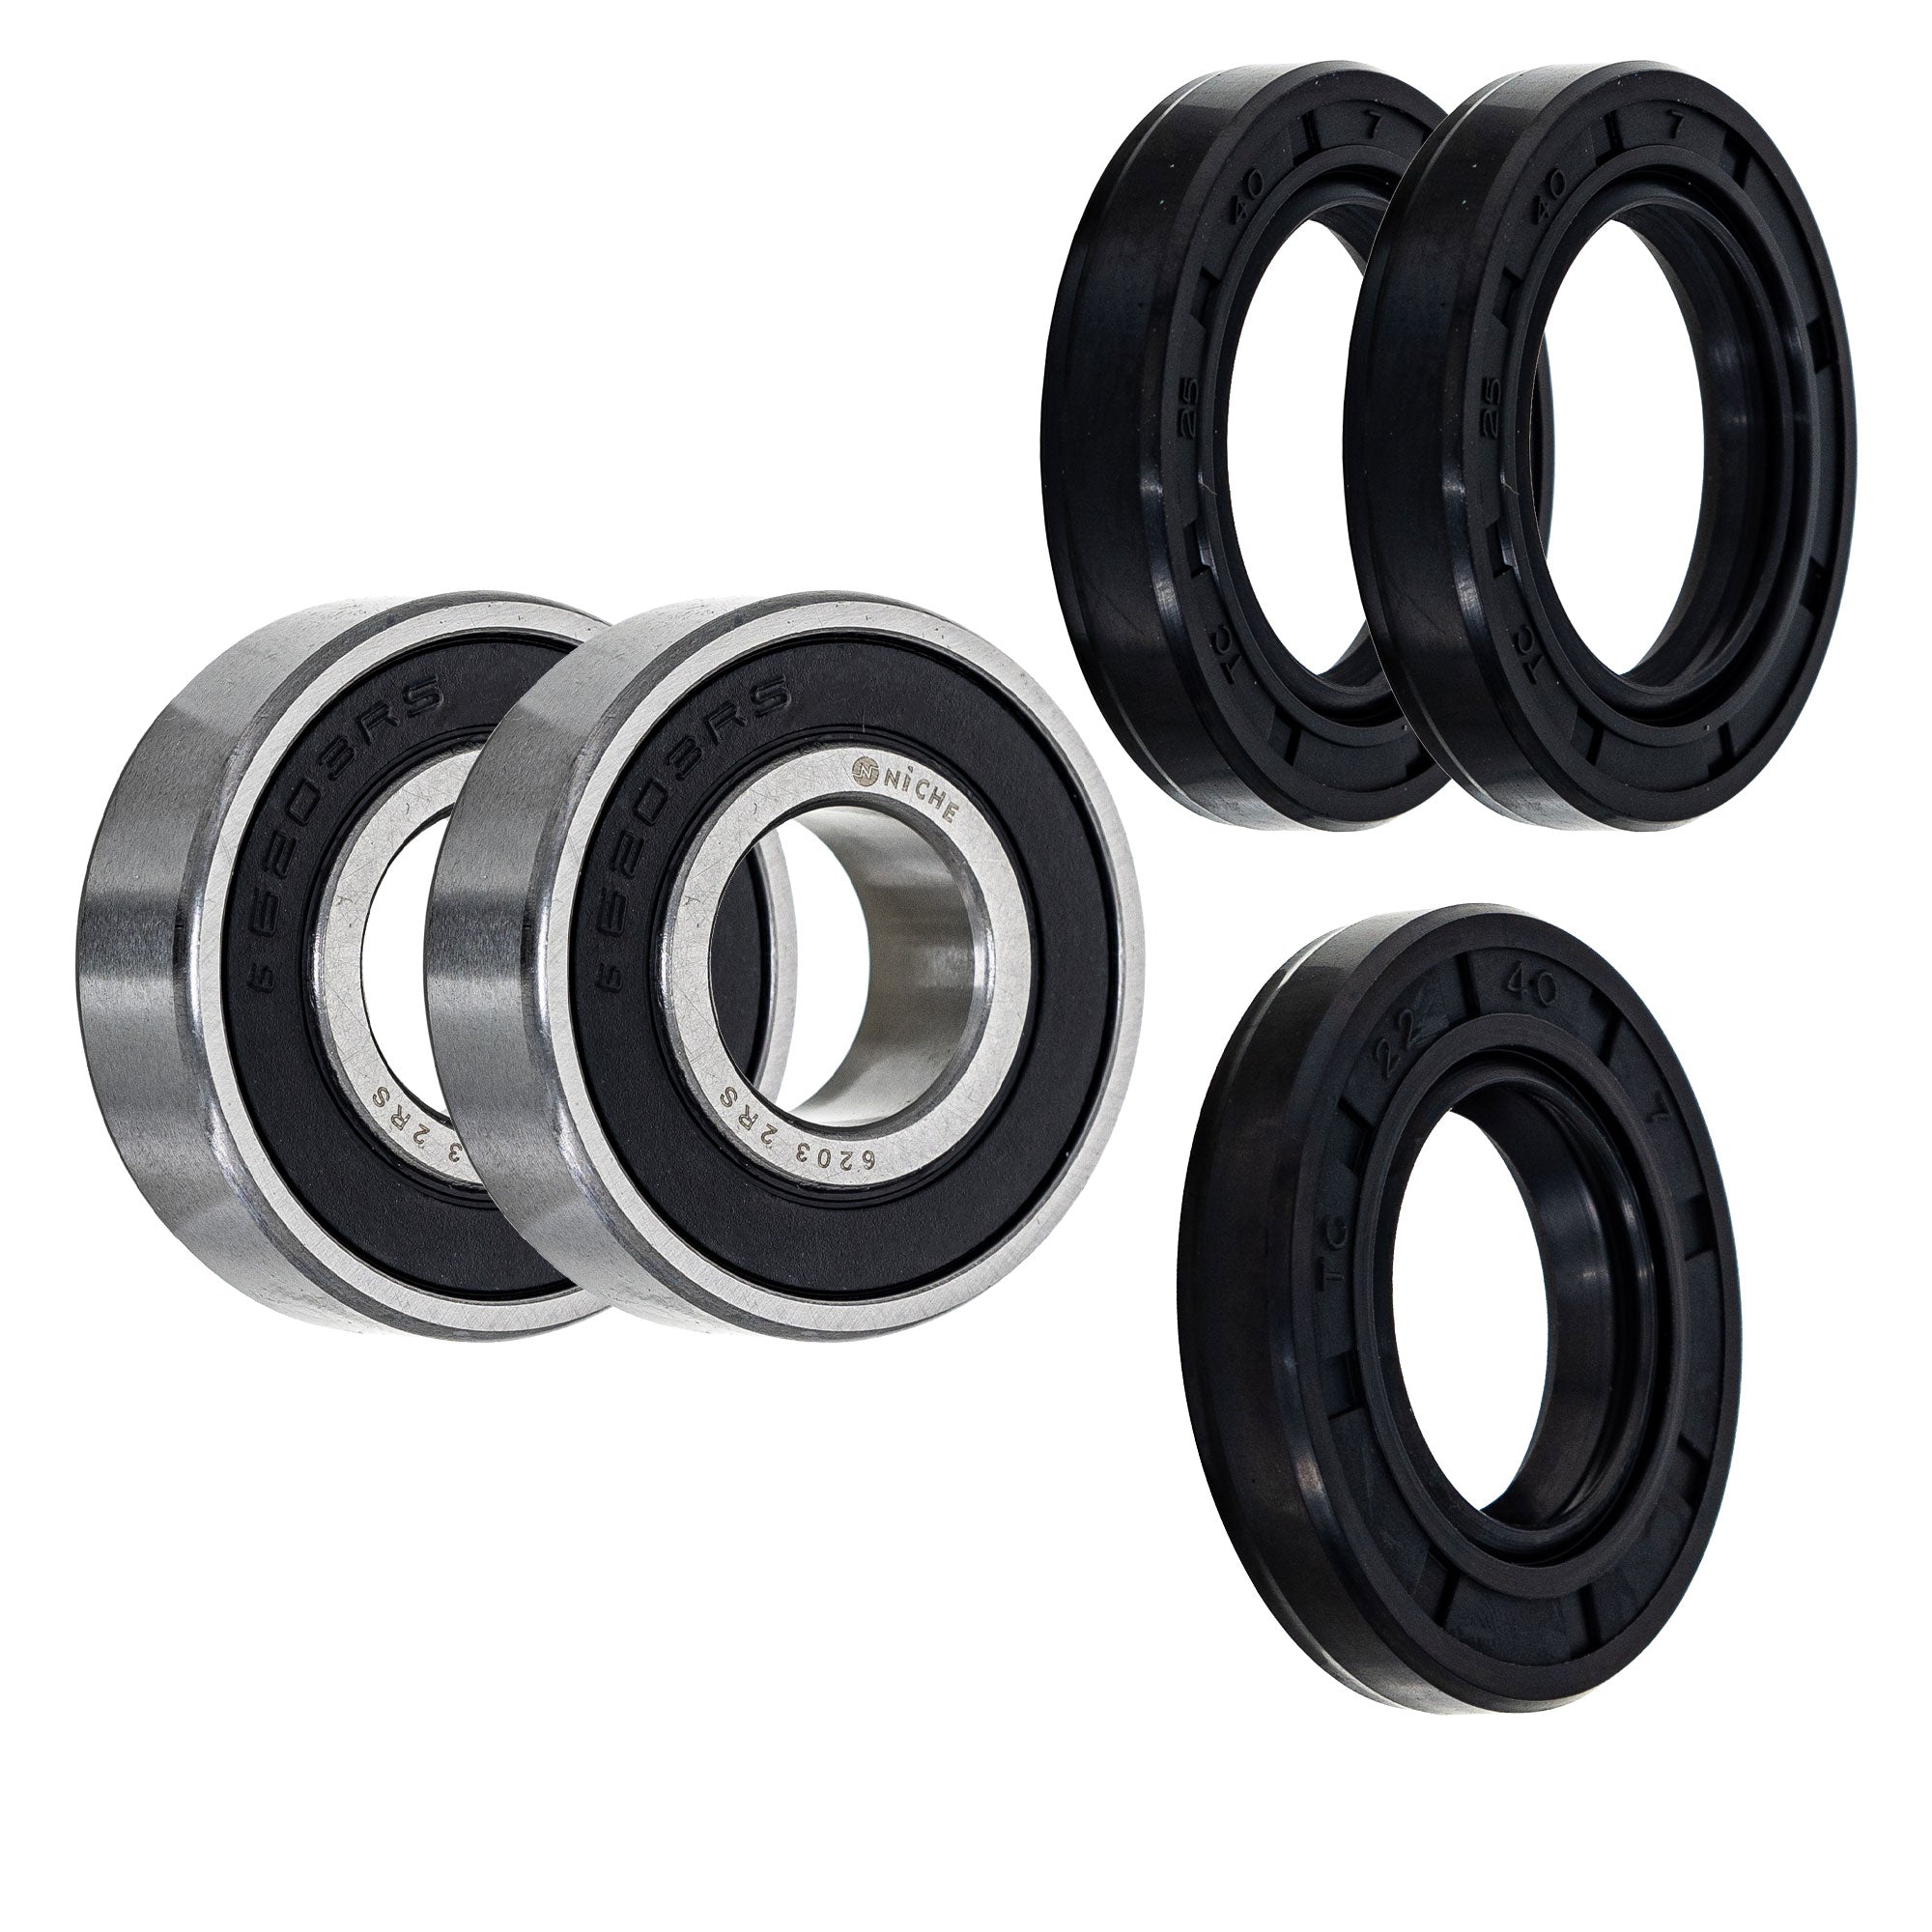 Wheel Bearing Seal Kit for zOTHER Ref No Z1 G650GS F700GS F650GS NICHE MK1008968